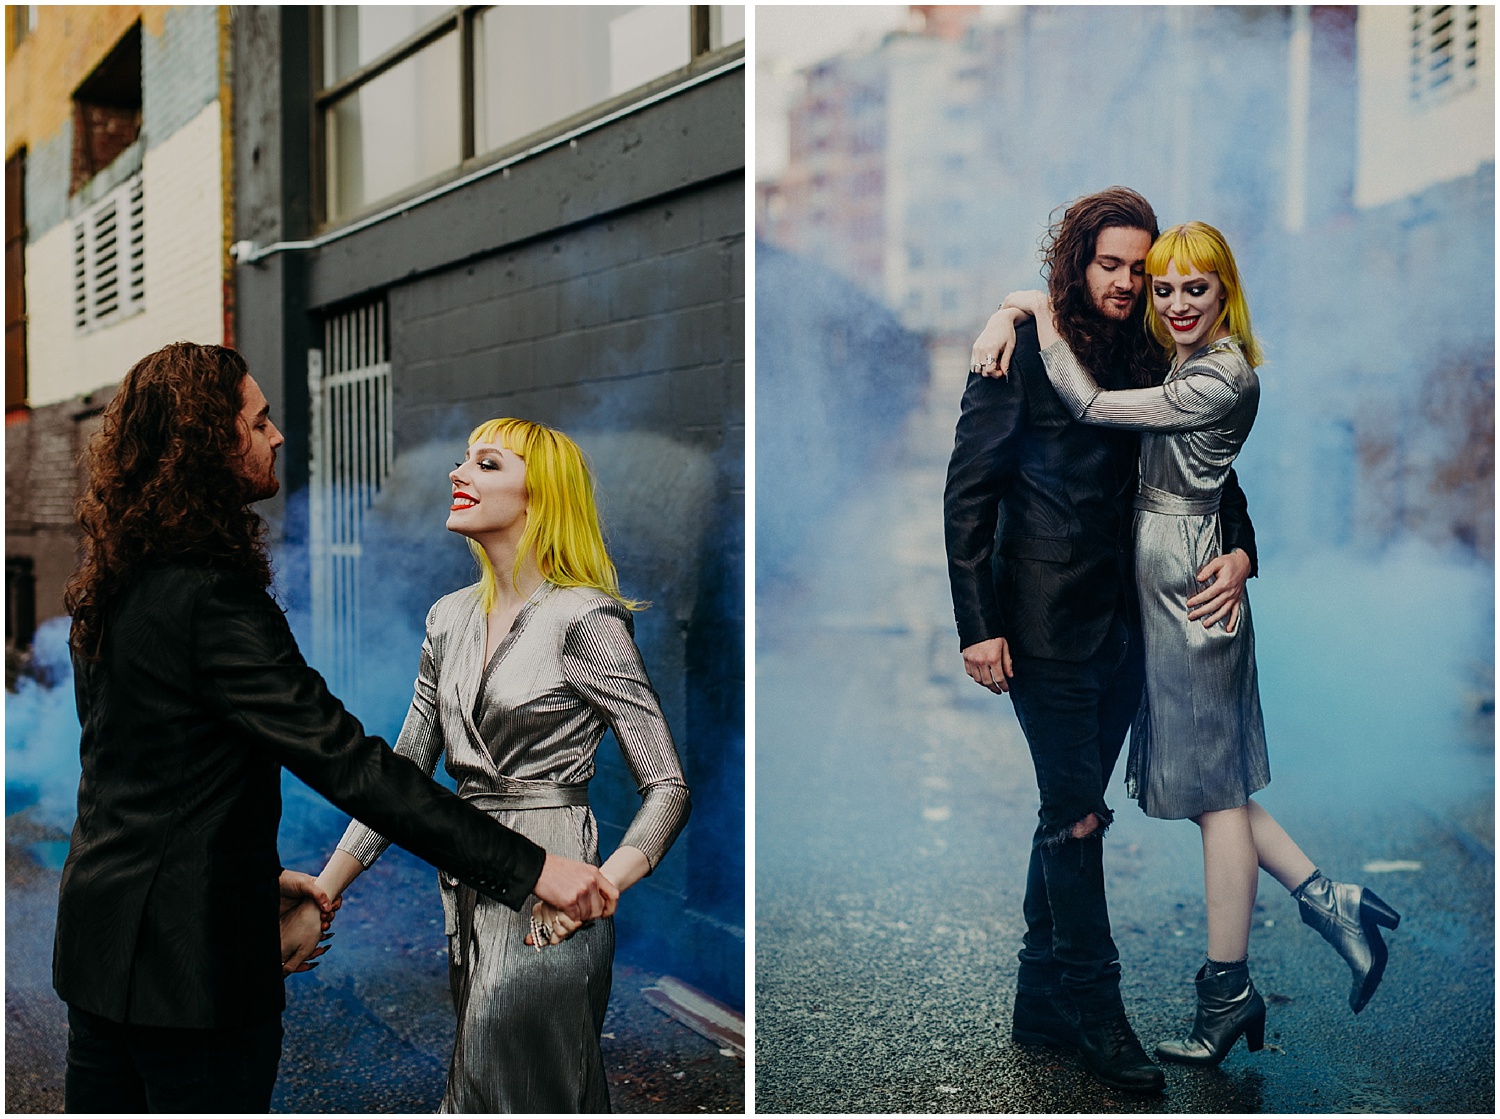  Vancouver back alley steam fog engagement couples session love fun smiles metallic dress black suit jacket red lips lipstick yellow hair concrete jungle retro modern blunt bangs&nbsp; 